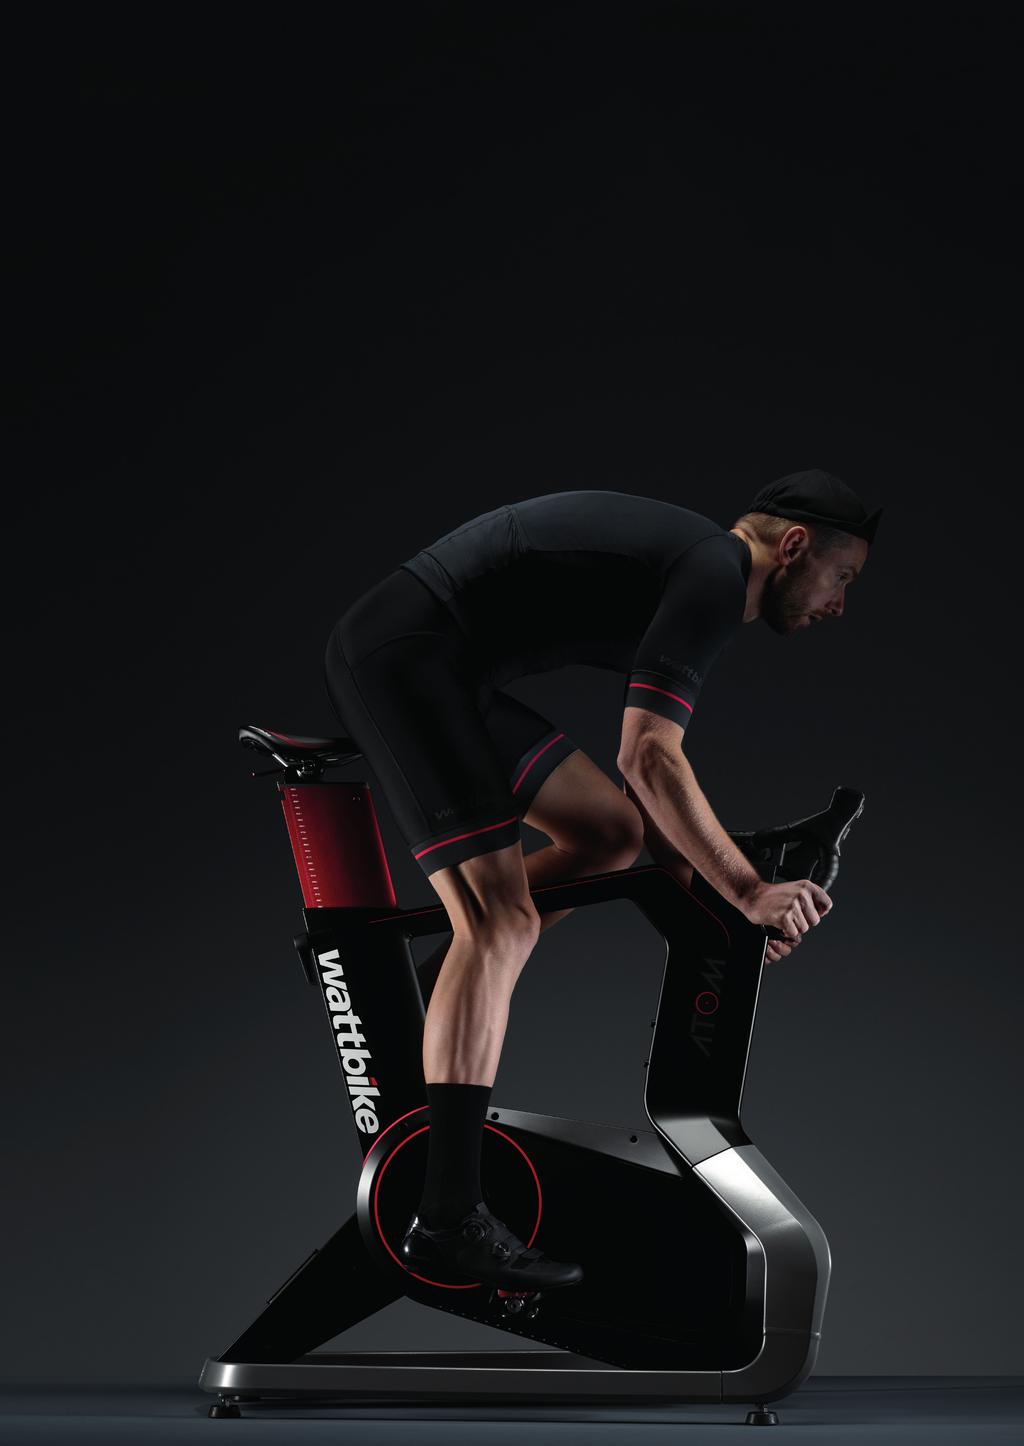 01 01 INTRODUCTION Wattbike Atom is the most realistic, intelligent and effective smart trainer on Earth.